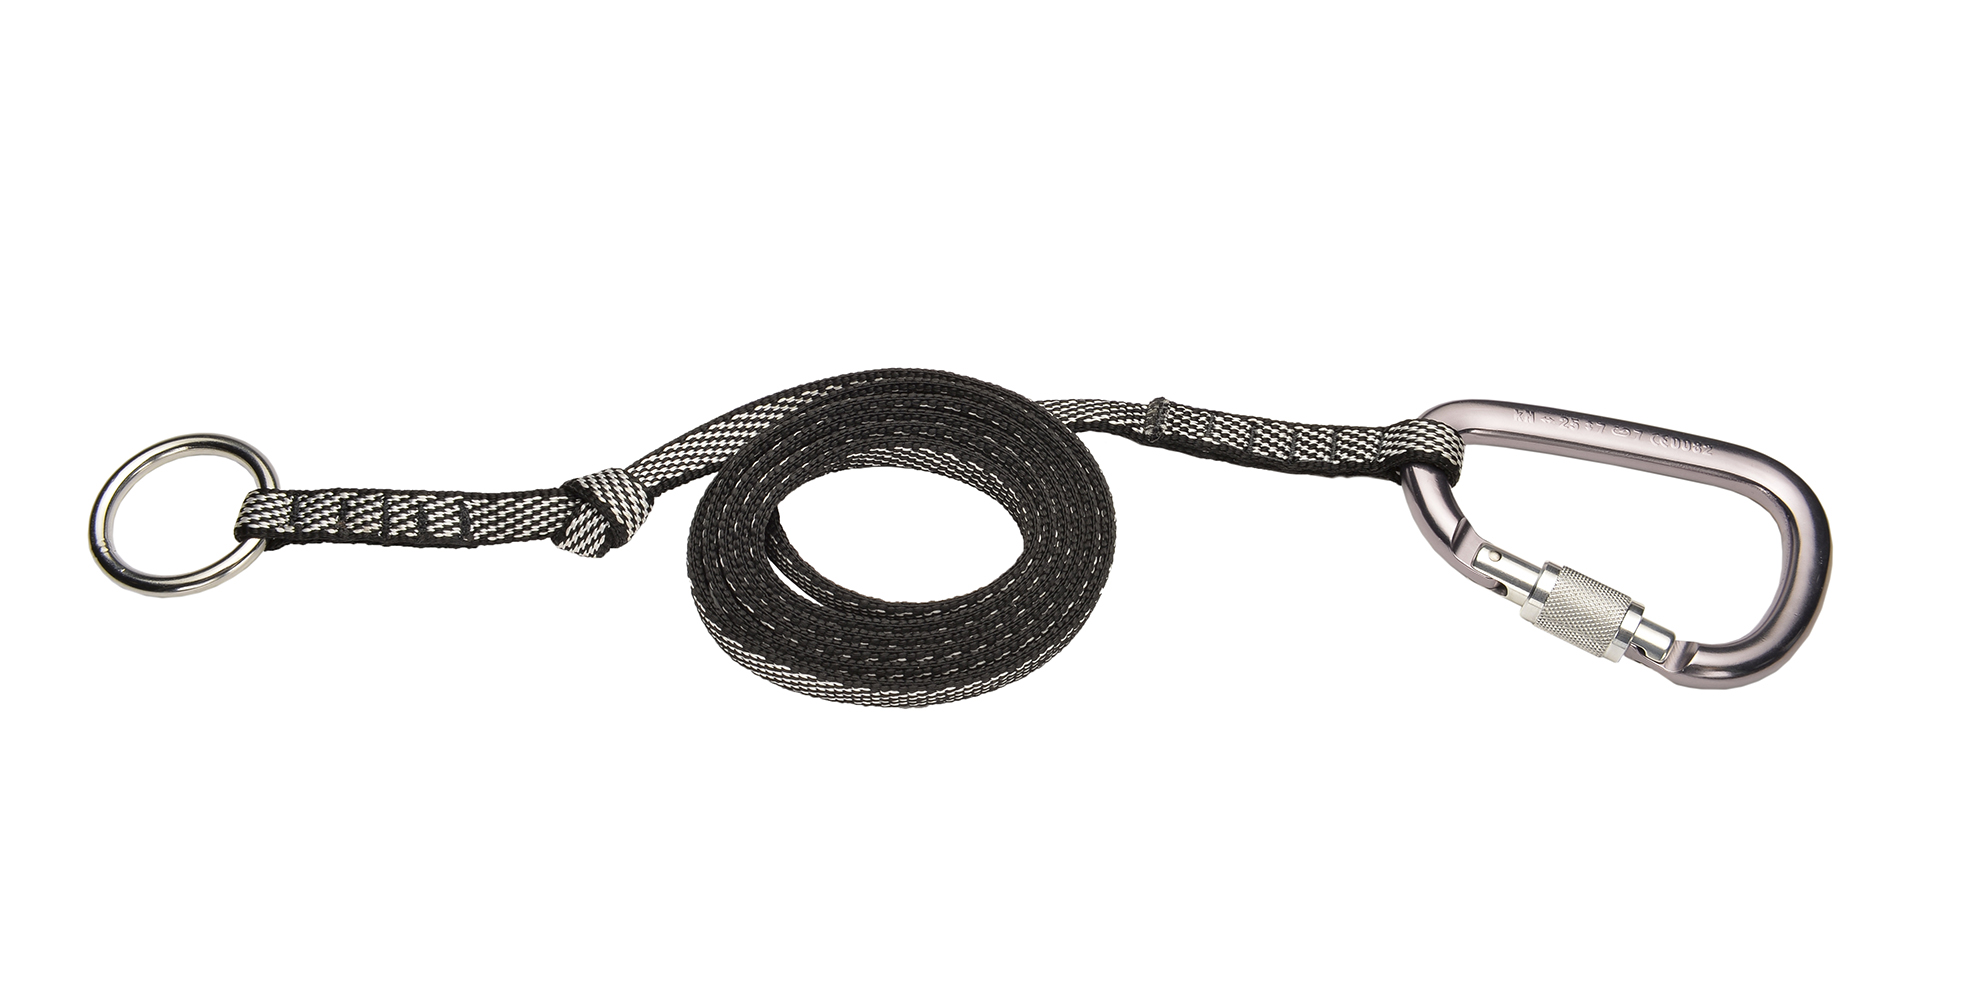 Astral Web-Toe Strap, Kayak Emergency Tow Rope 16ACCWEB with Free